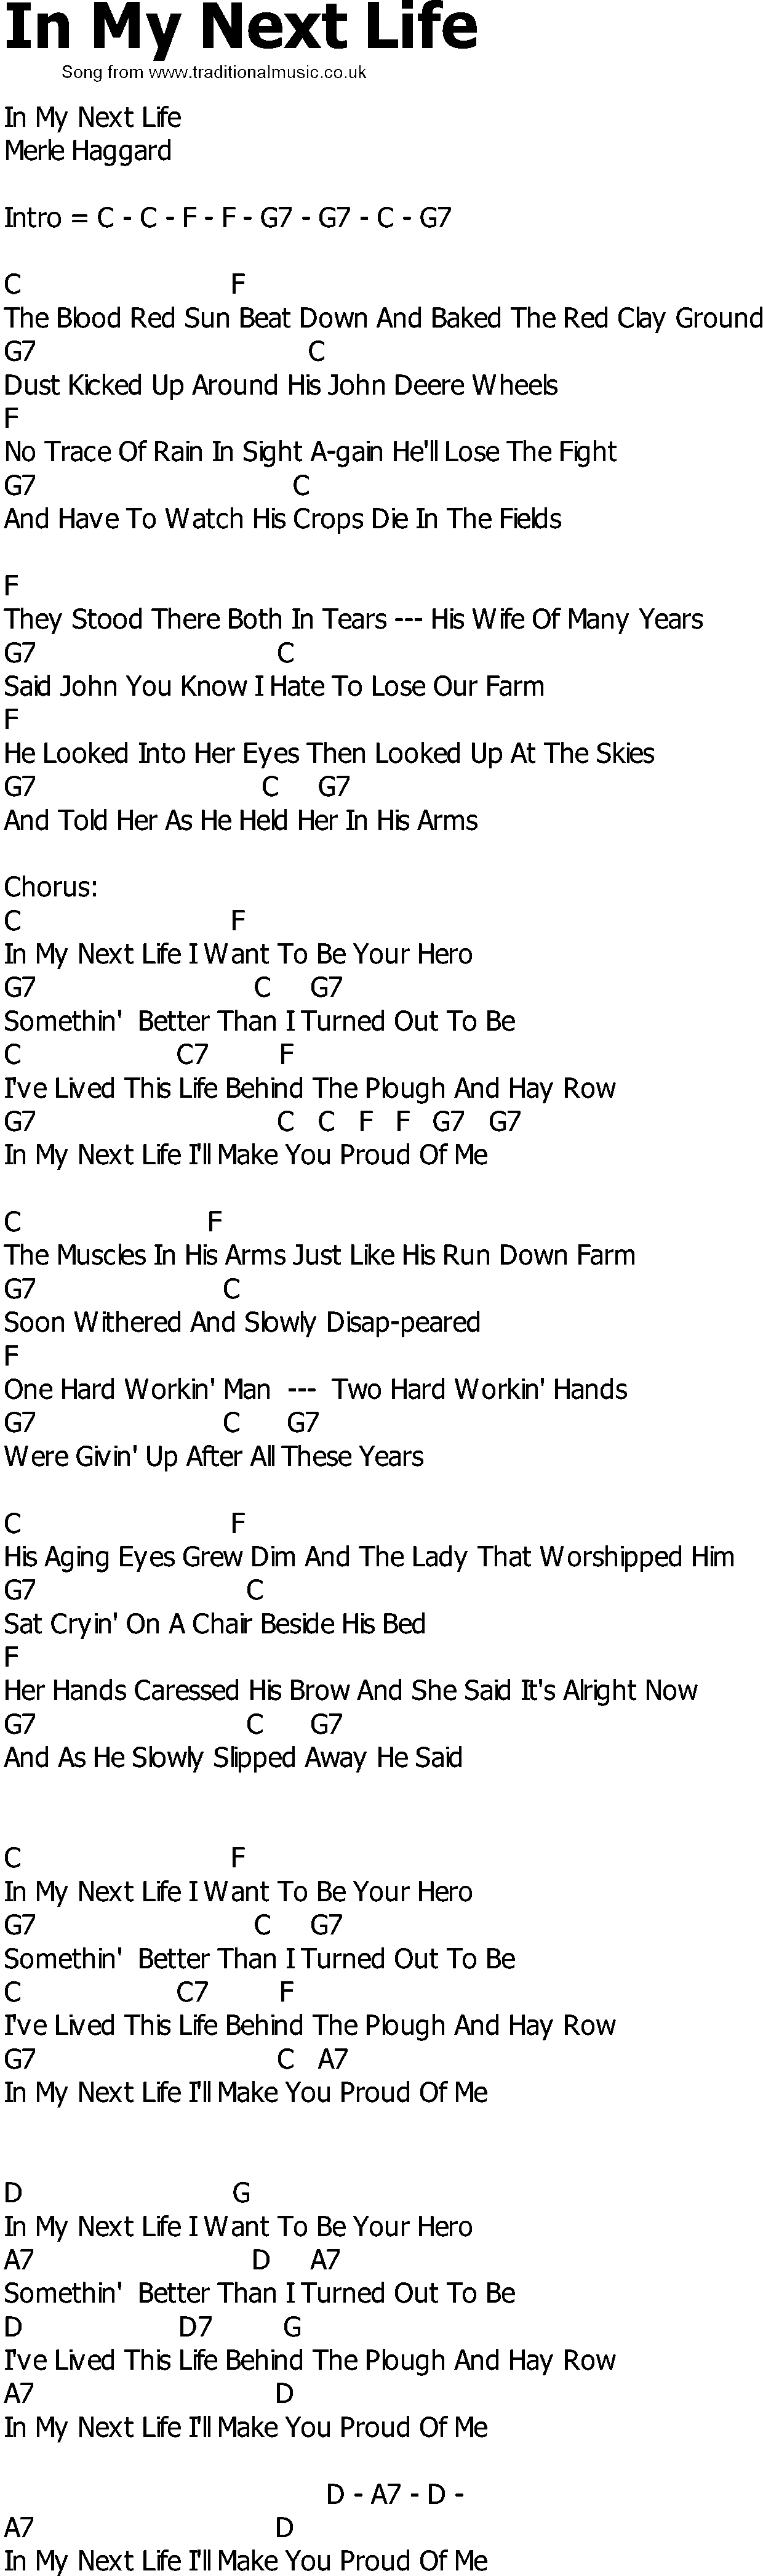 Old Country song lyrics with chords - In My Next Life